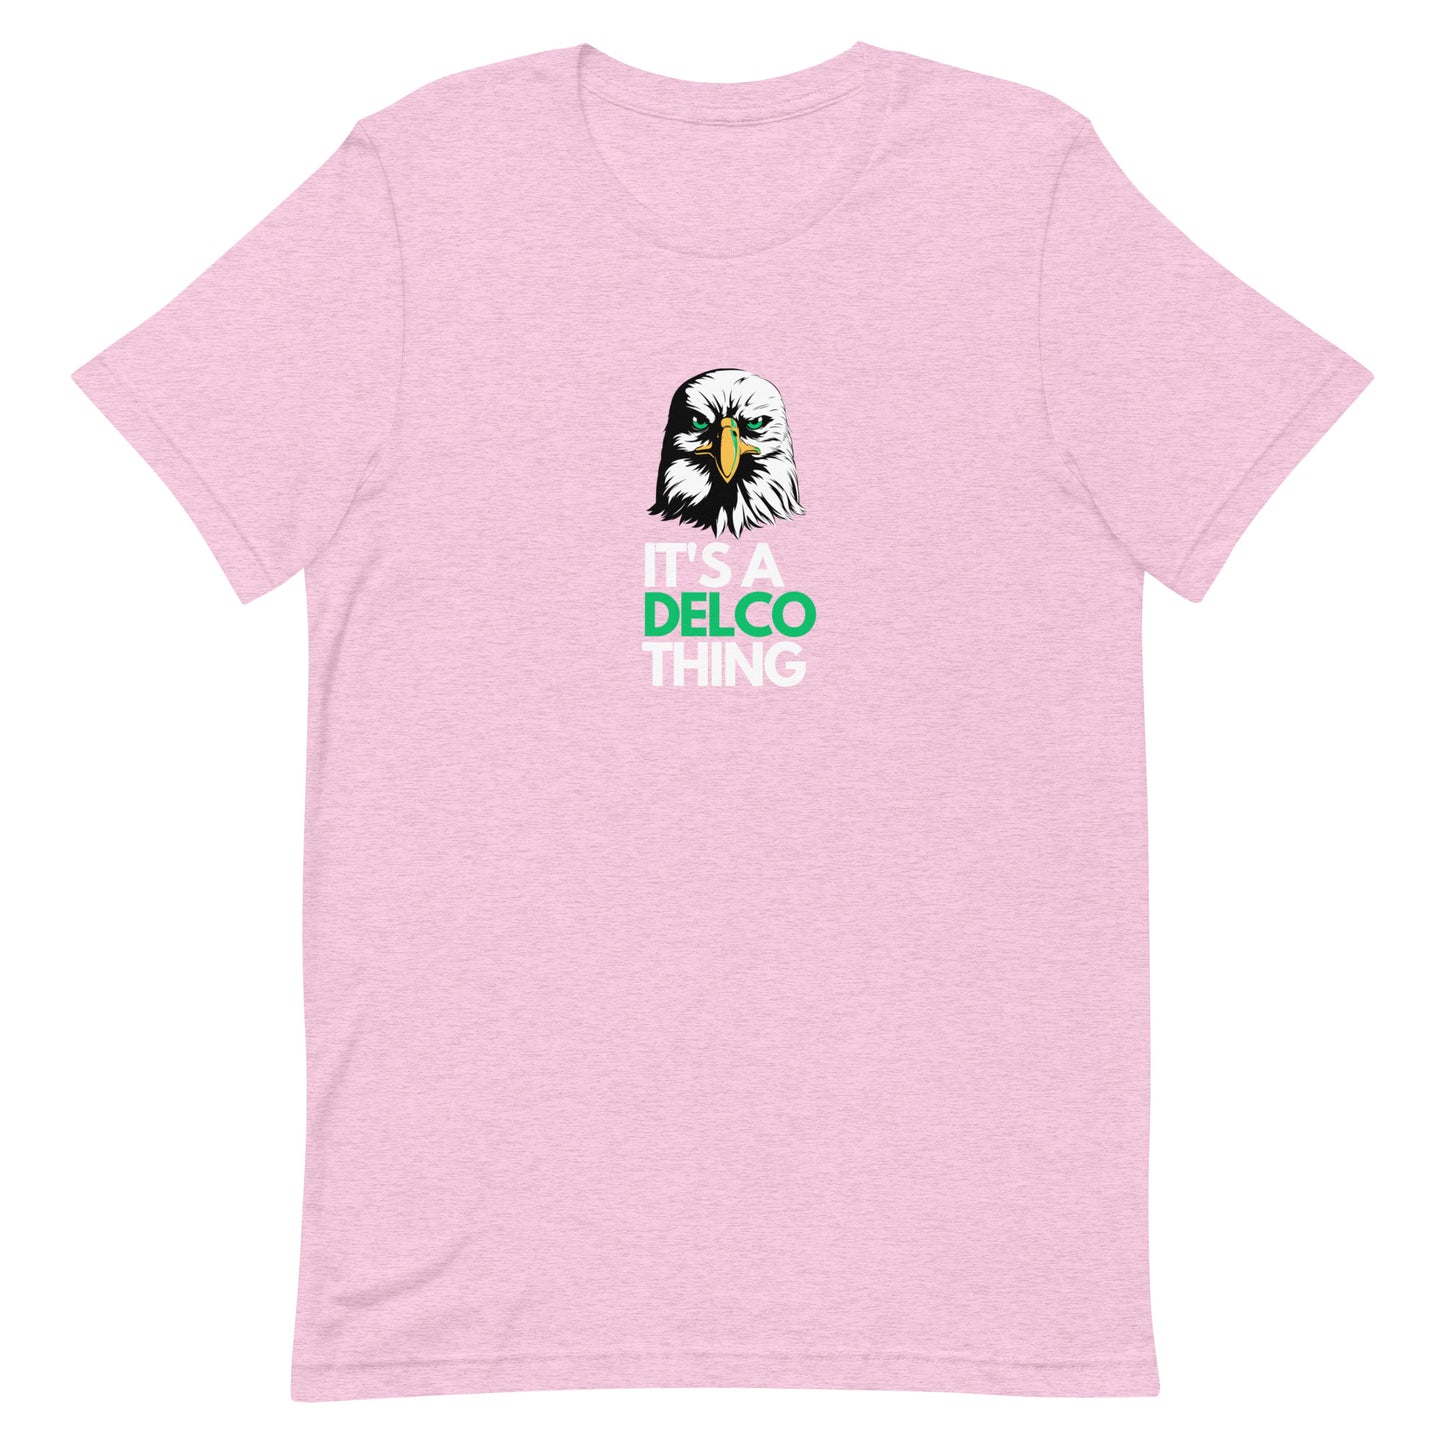 It's a Delco thing Tee